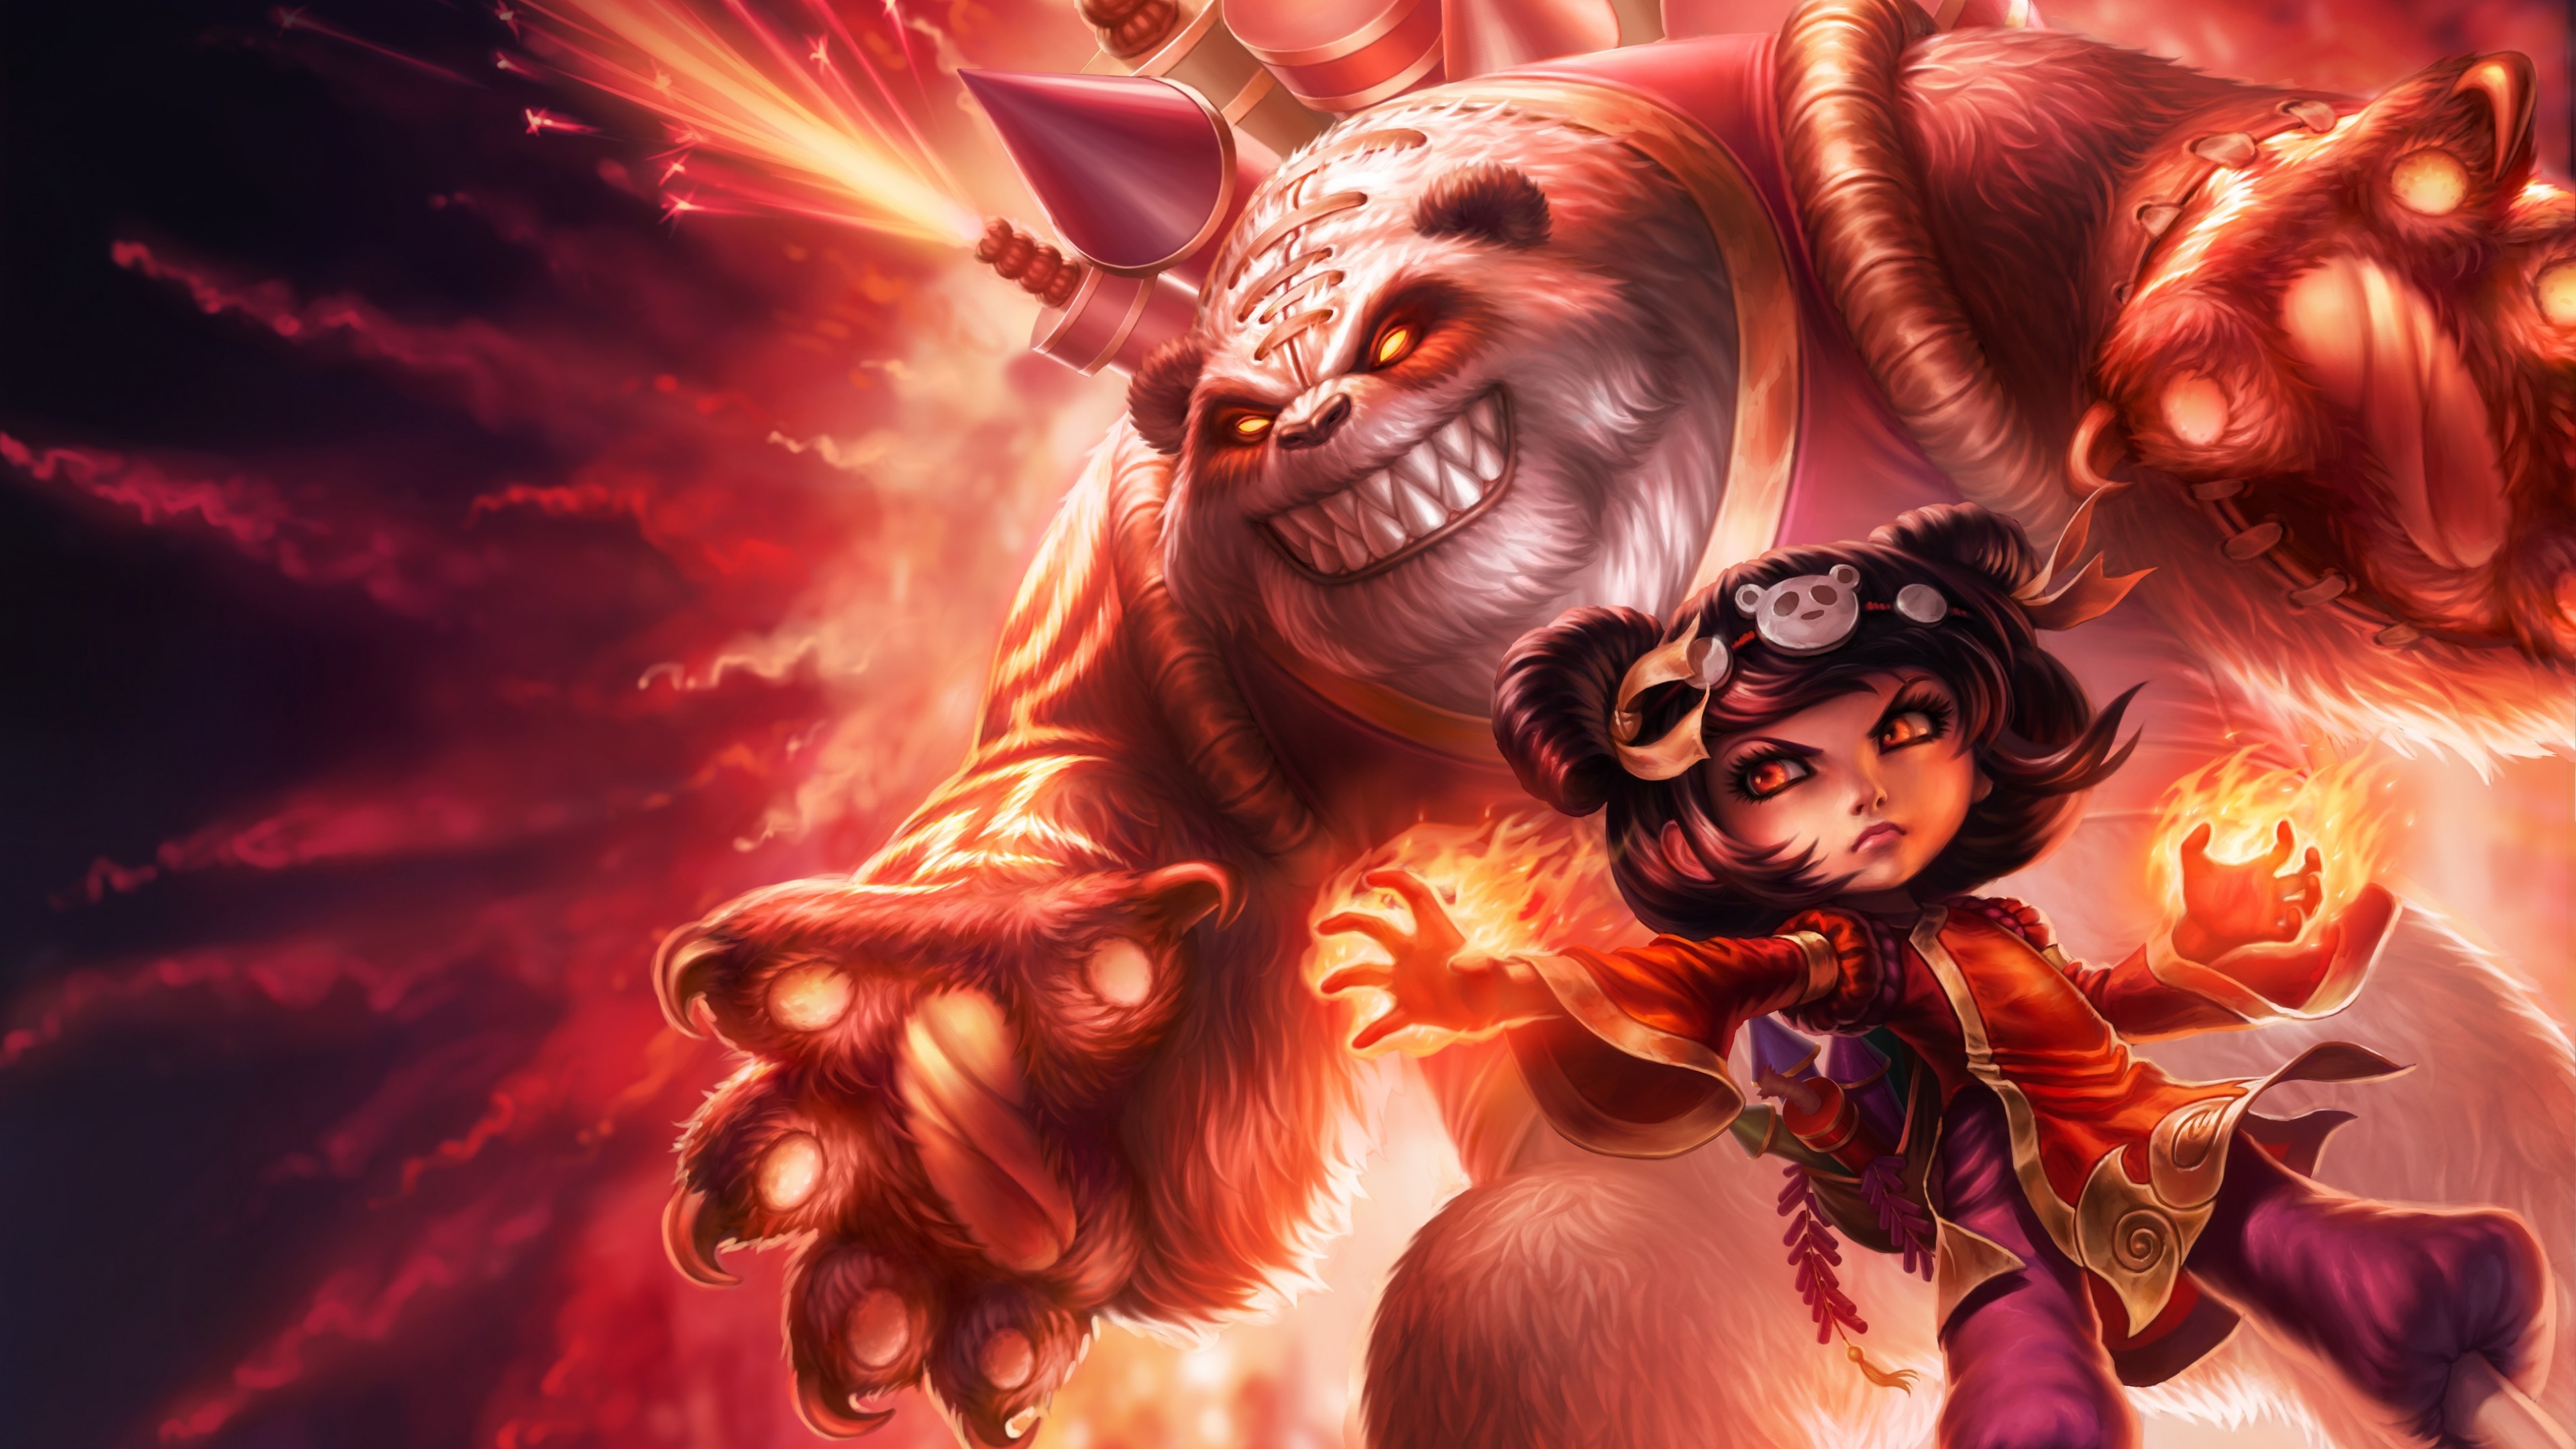 Wallpaper Annie League Of Legends Game Lol Moba Games